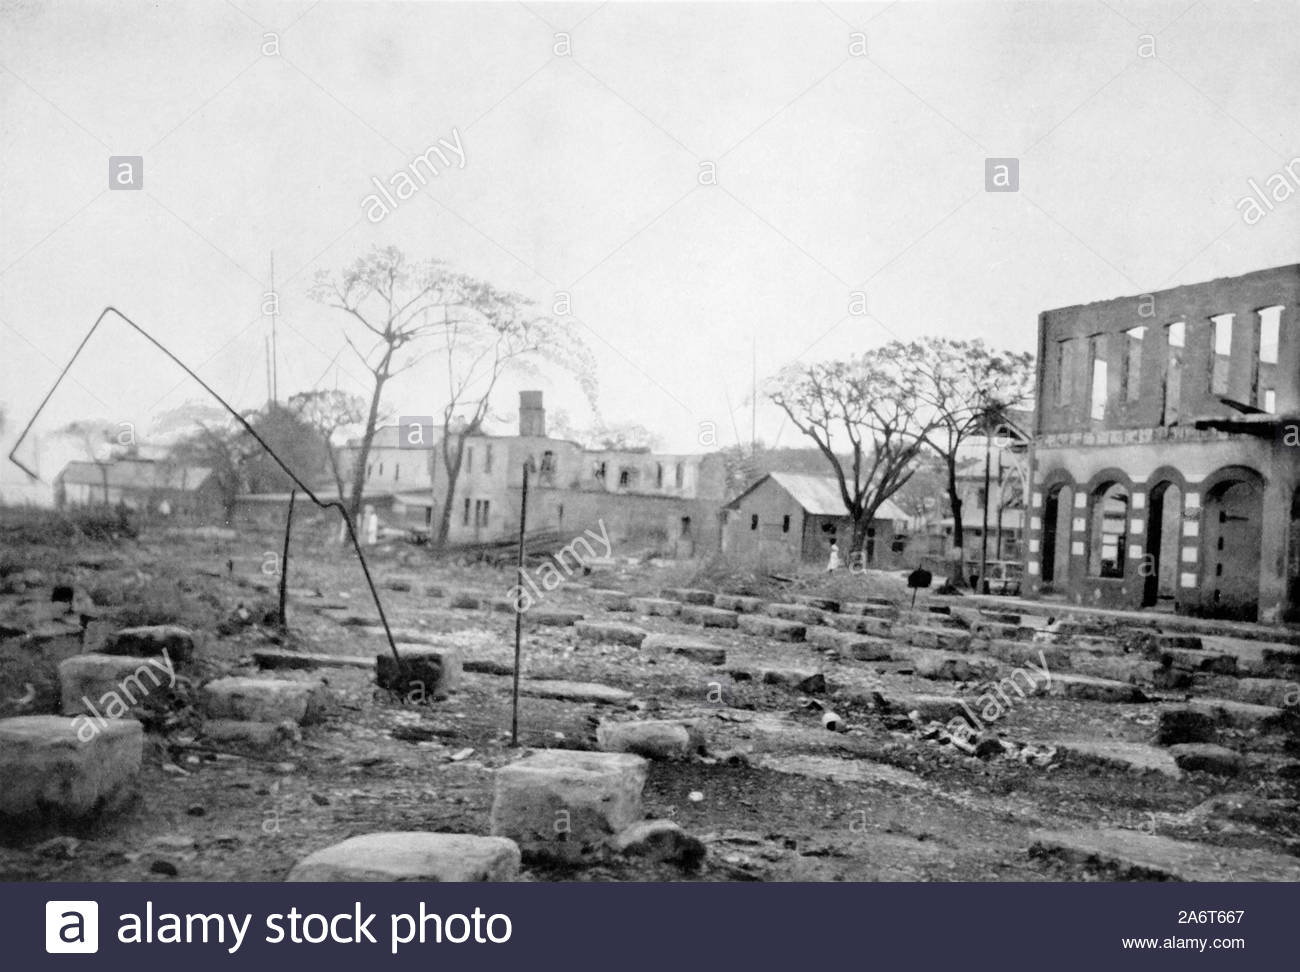 WW1 The town of Papeete Tahiti after german bombardment by warships Scharnhorst and Gneisenau, vintage photograph from 1914 Stock Photo